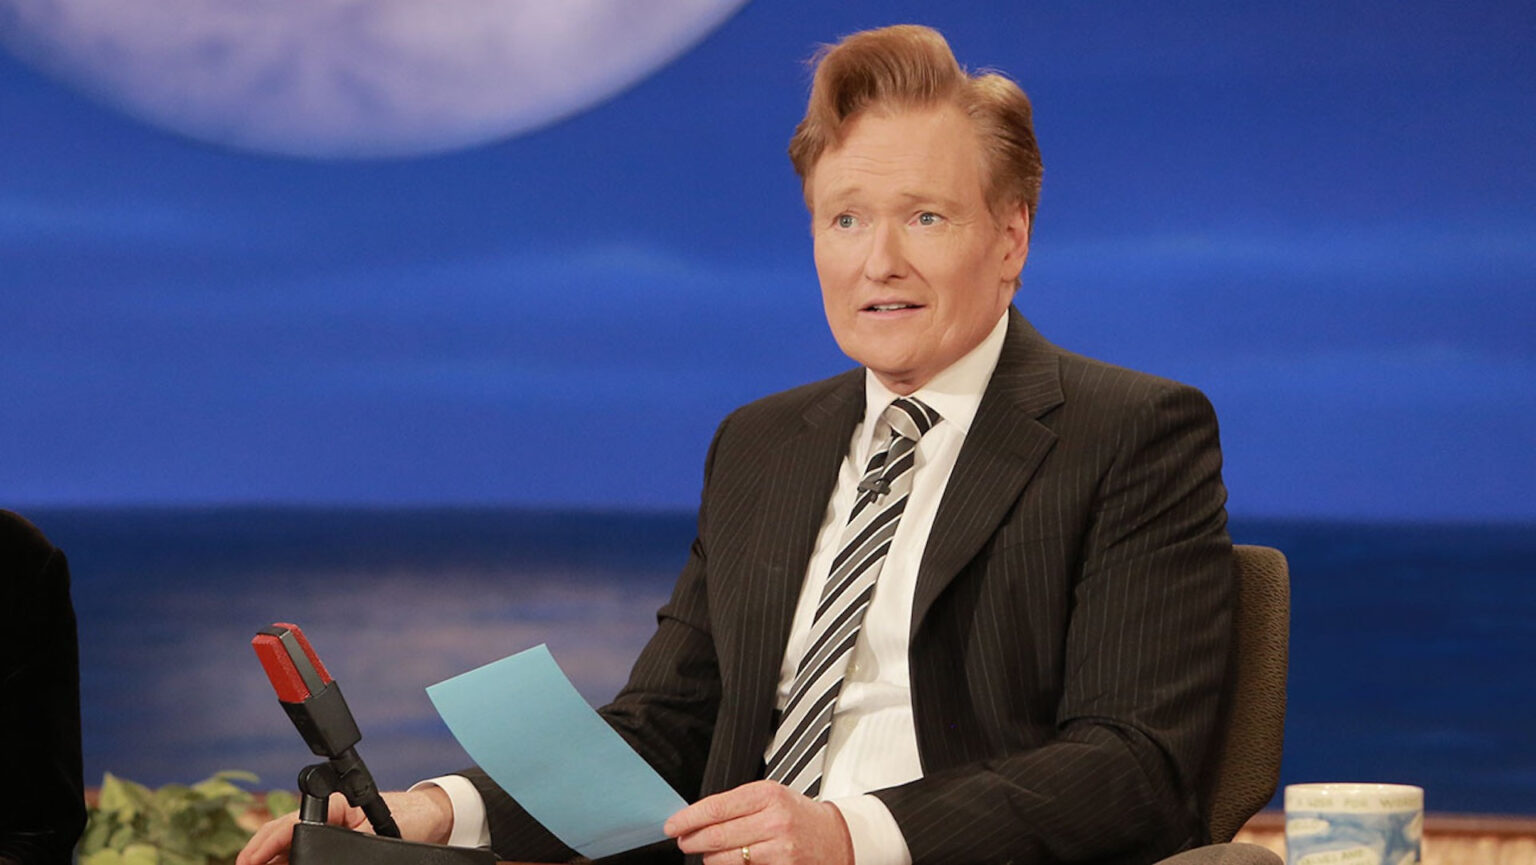 Are you still with Coco? Find out why Conan O'Brien is leaving his late-night show with TBS, and check out where you can find the funnyman next.